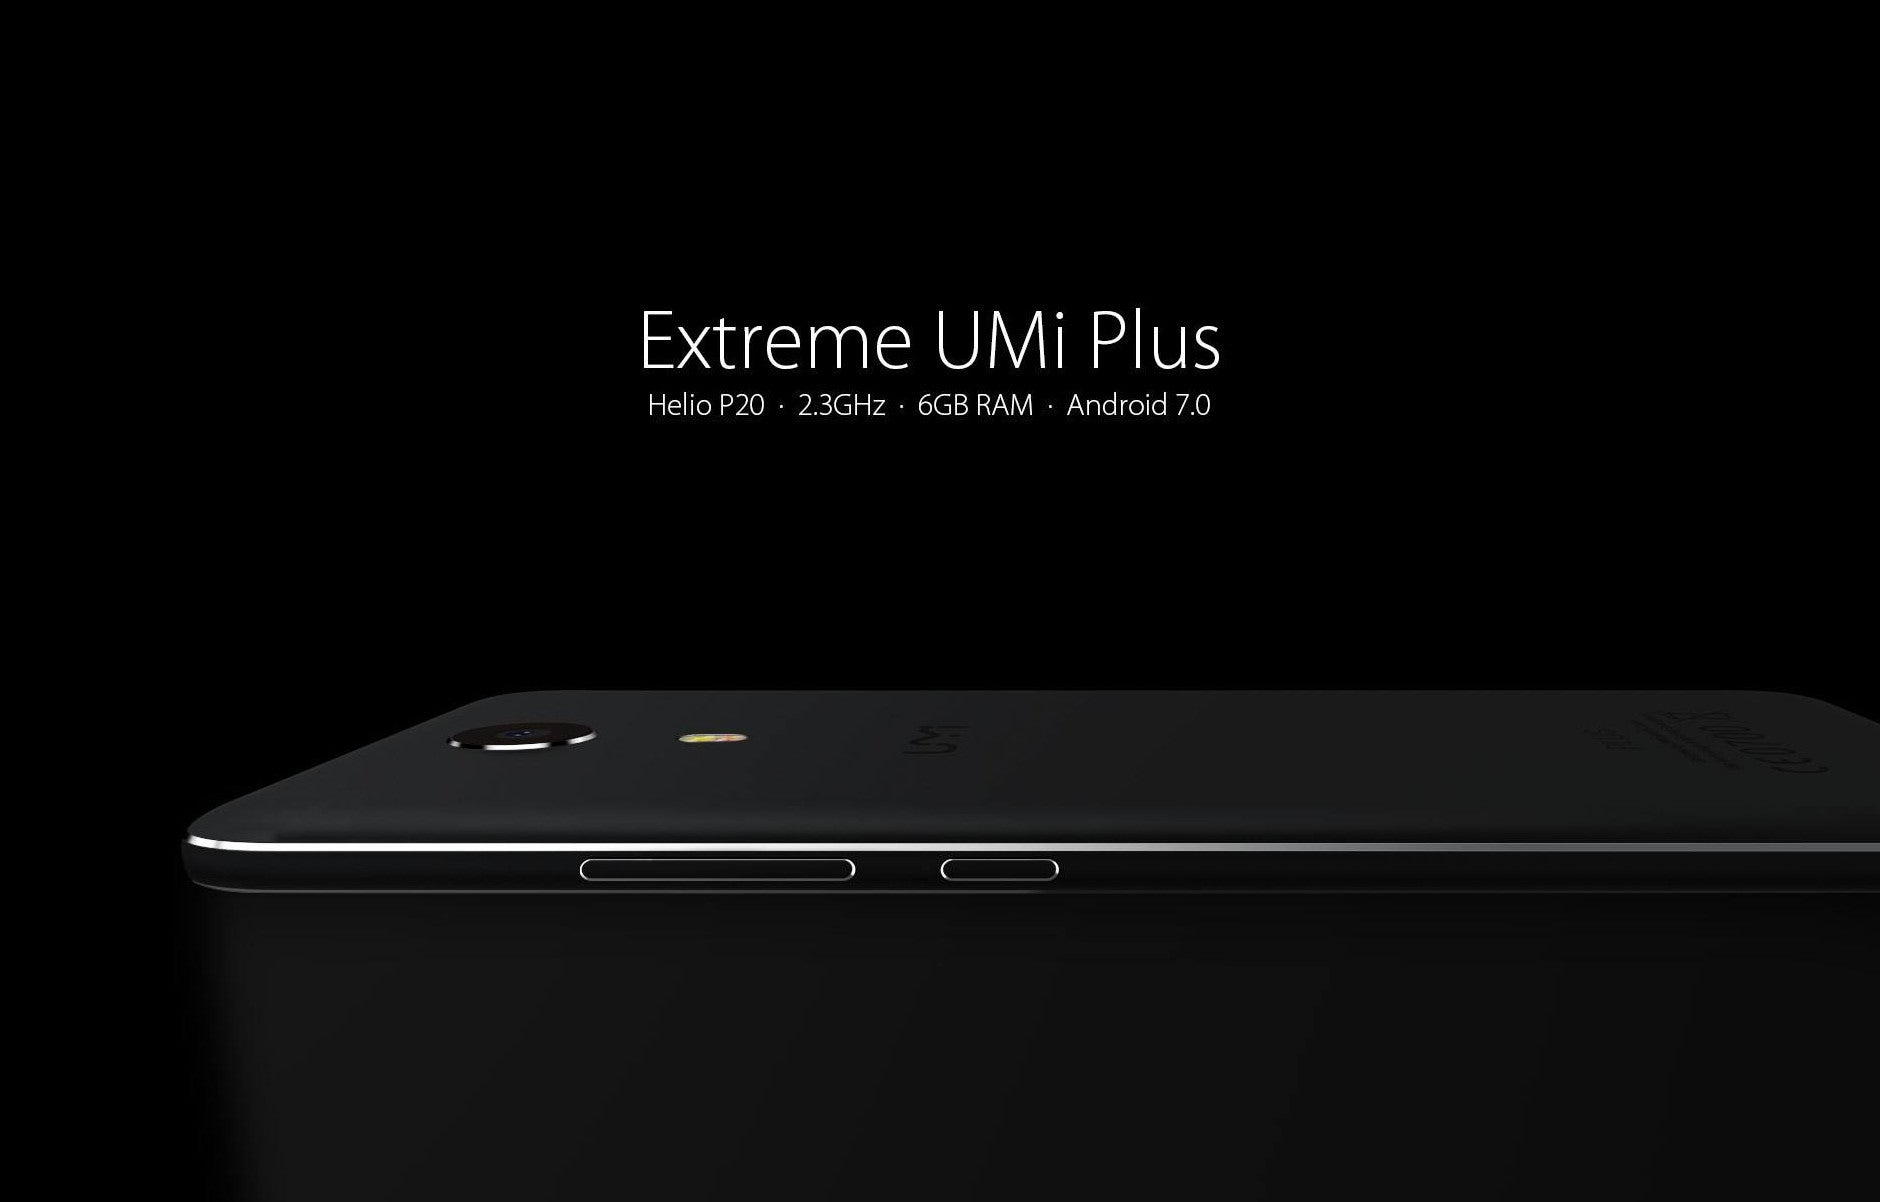 UMi Plus Extreme Edition coming soon with 6GB RAM, Helio P20 CPU, Android 7.0 Nougat